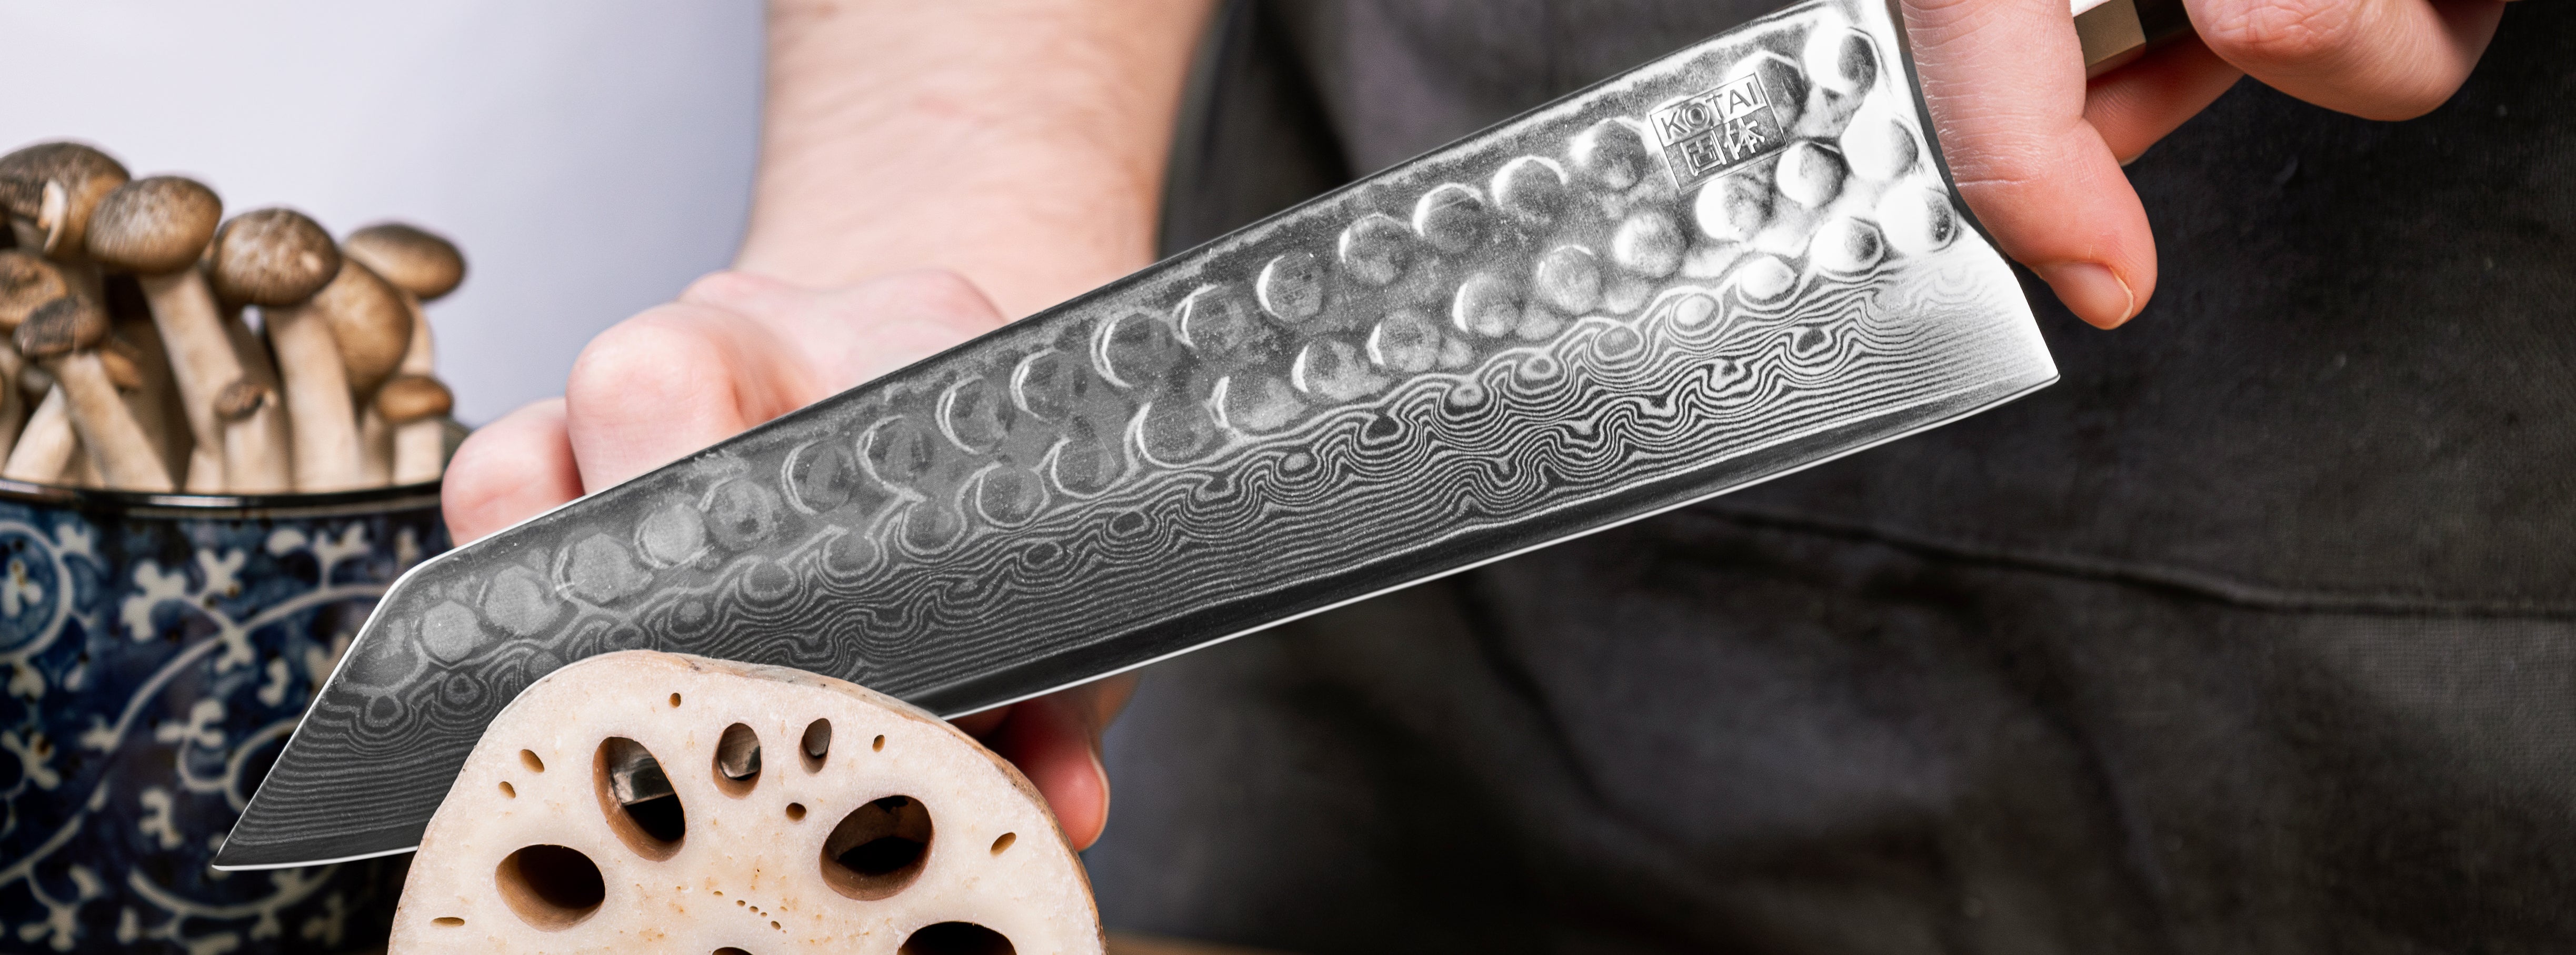 model hands are holding the kiristuke bunka collection in damascus steel to cut an ingredient